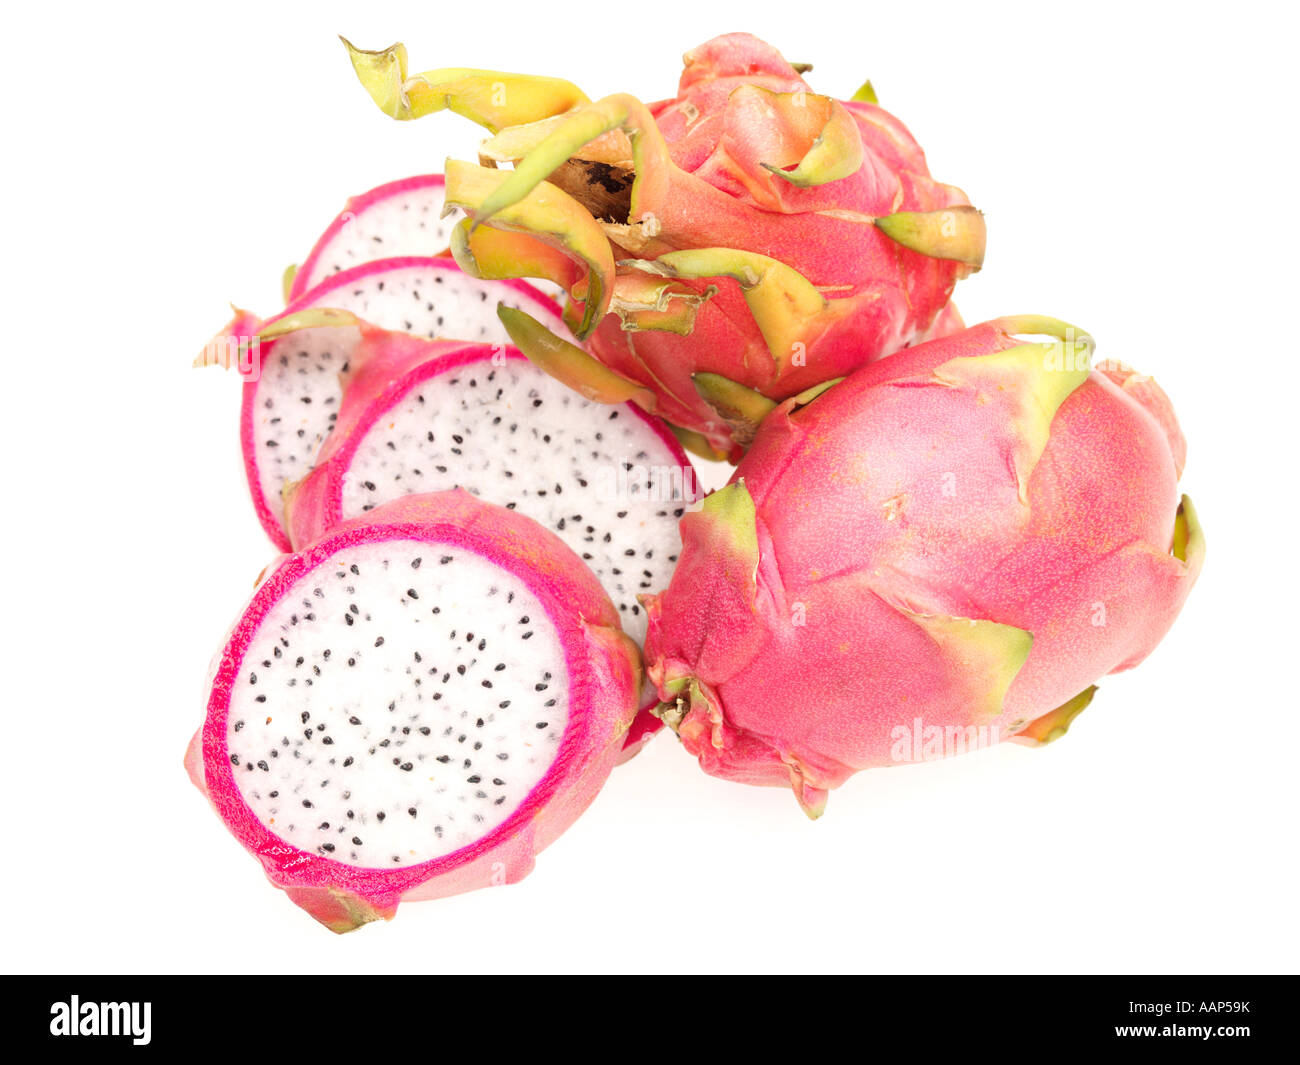 Fresh Ripe Tropical Dragon Fruit In Slices Or Sliced Open Isolated Against A White Background With No People And A Clipping Path Stock Photo